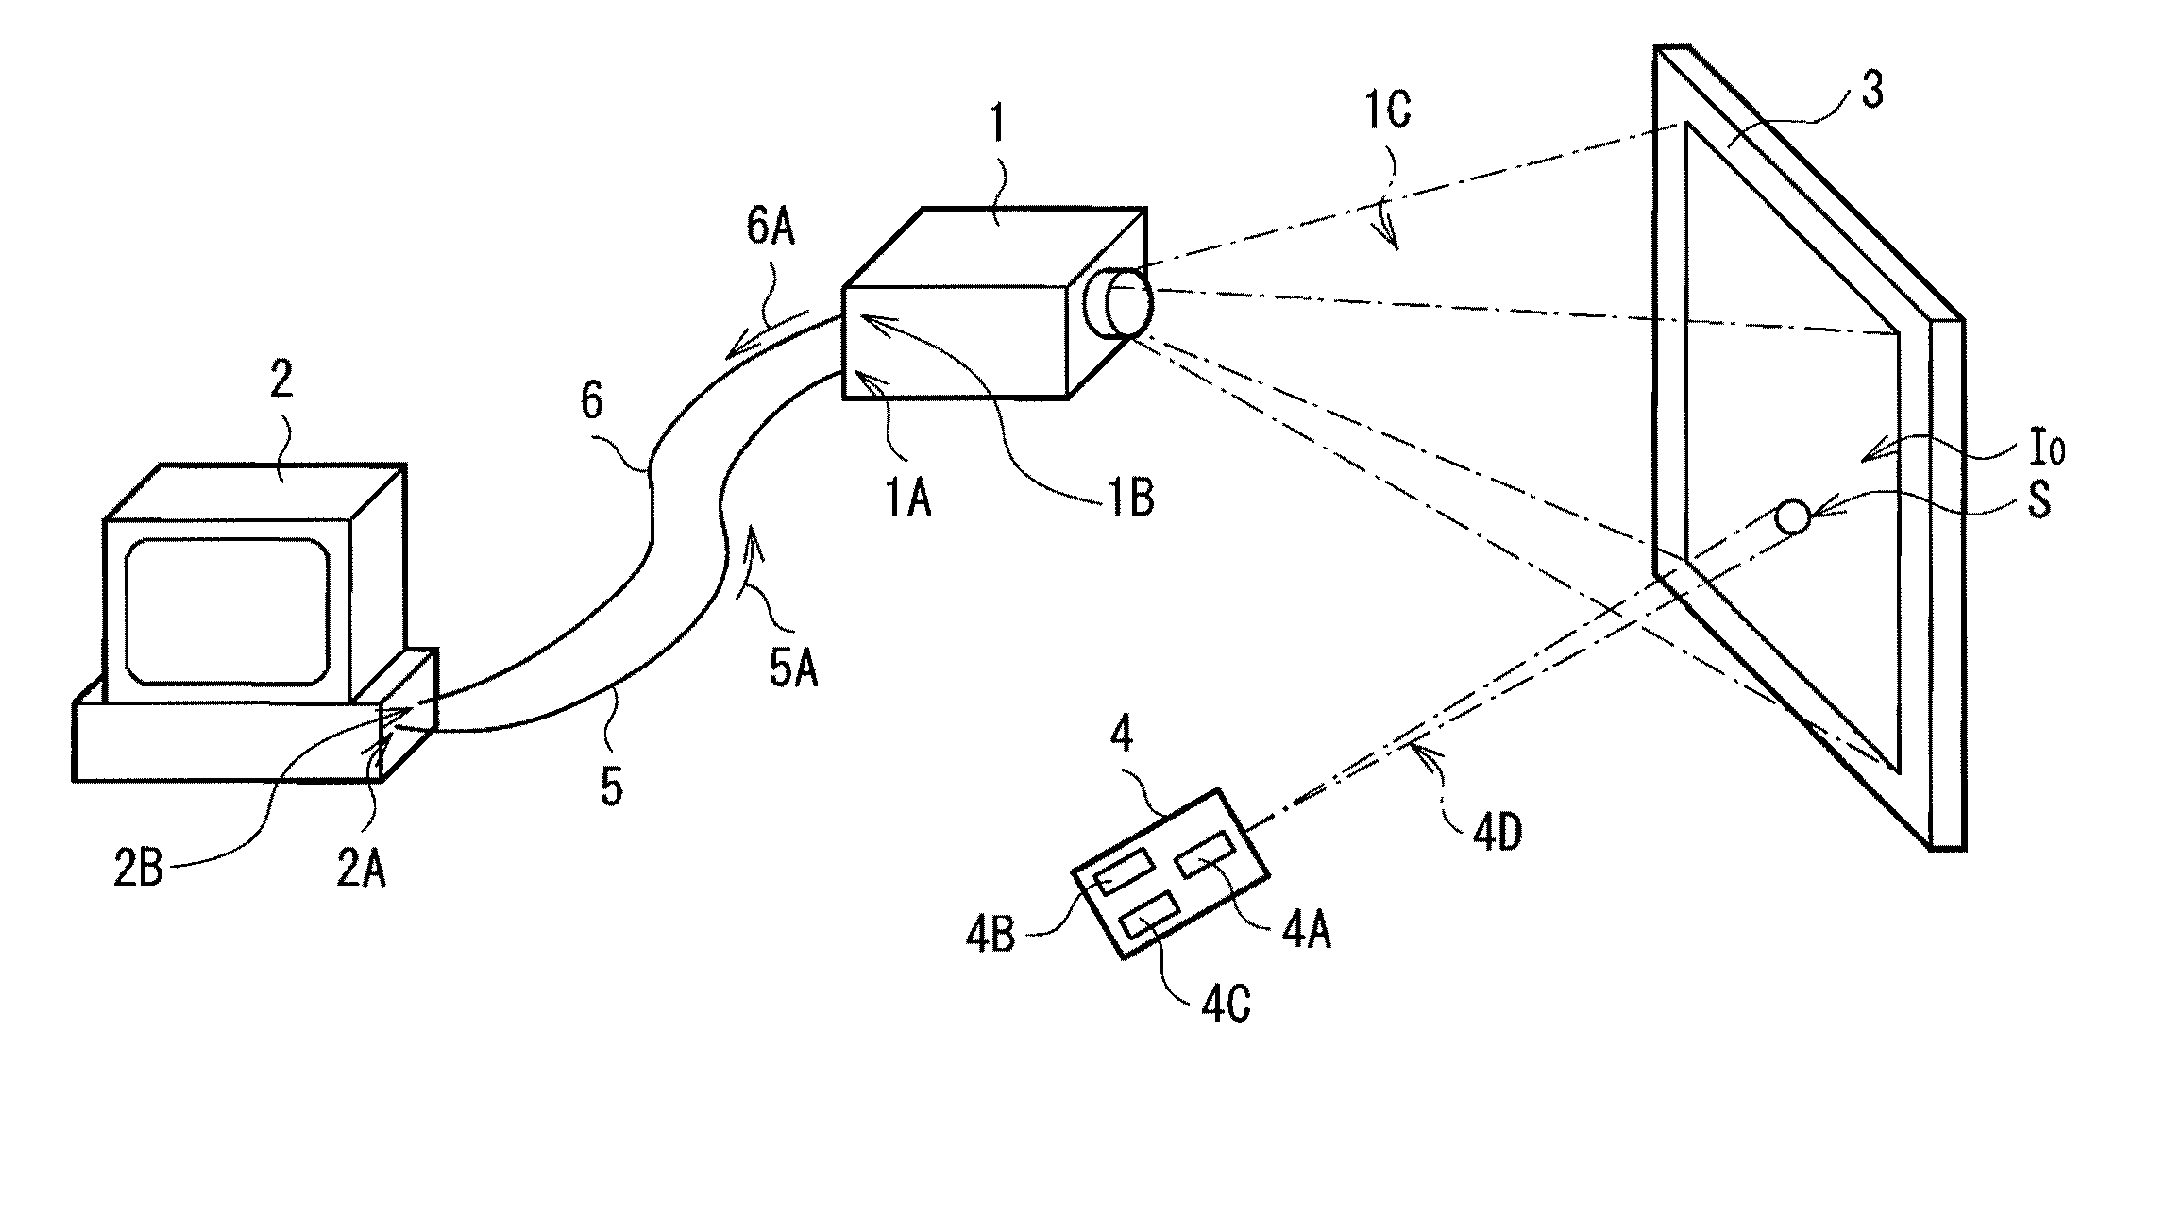 Image display device and position detecting method